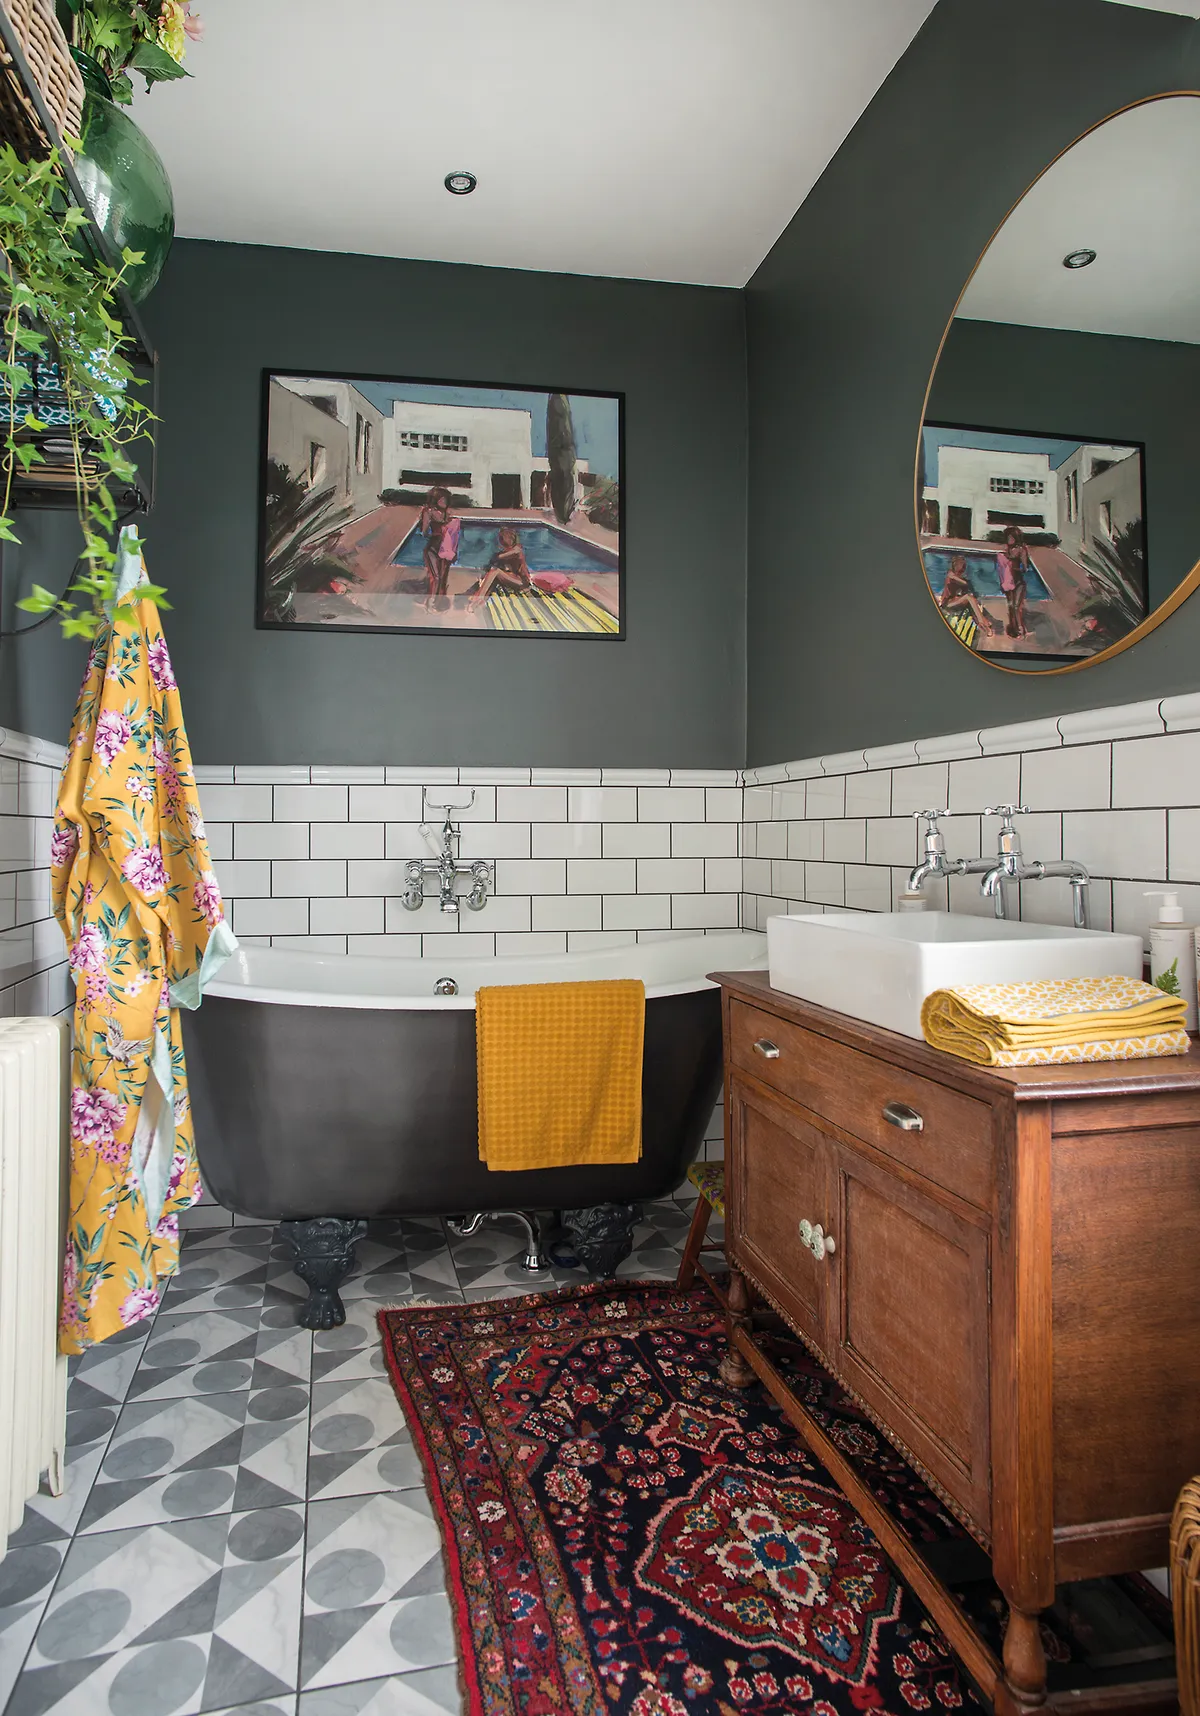 ‘I used Down Pipe from Farrow & Ball again in the bathroom and it makes a crisp contrast against the white wall tiles. I spent ages looking at floor tiles, before spotting these in Wickes. They weren’t expensive and I love the 1980s vibe’